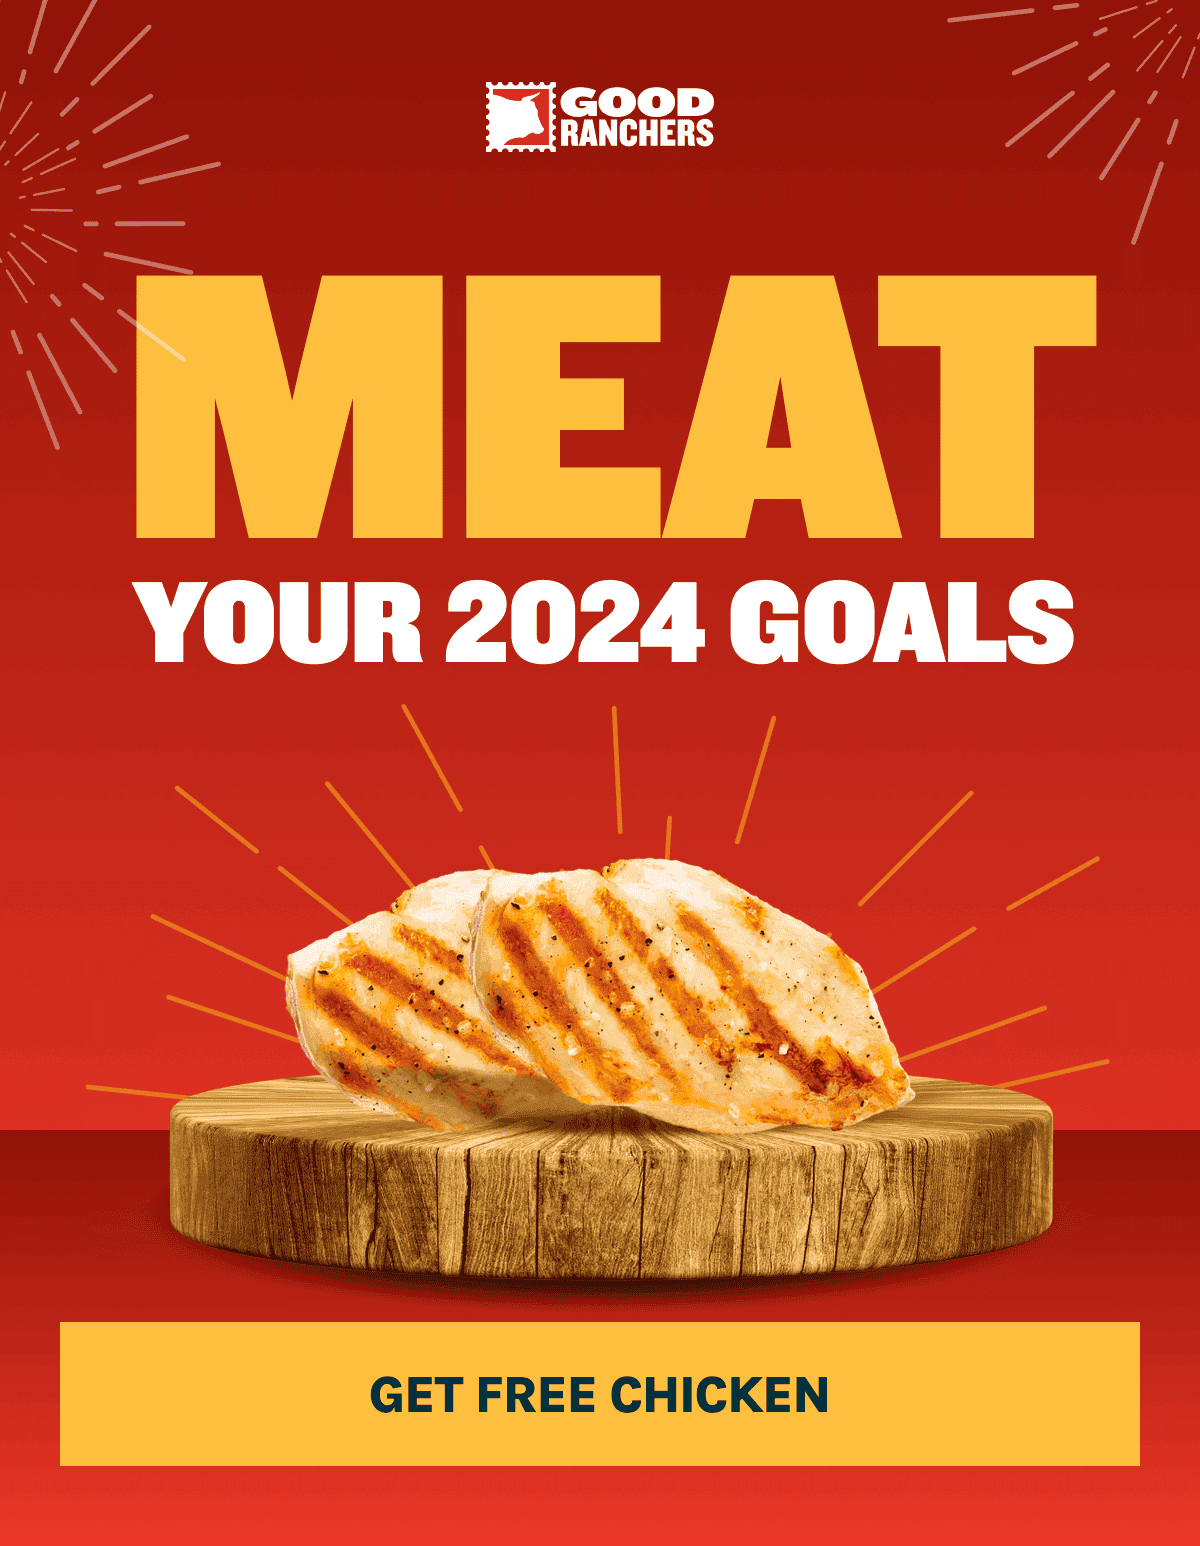 Subscribe to Good Ranchers and use code NEWYEAR at checkout to claim free chicken for 1 year!